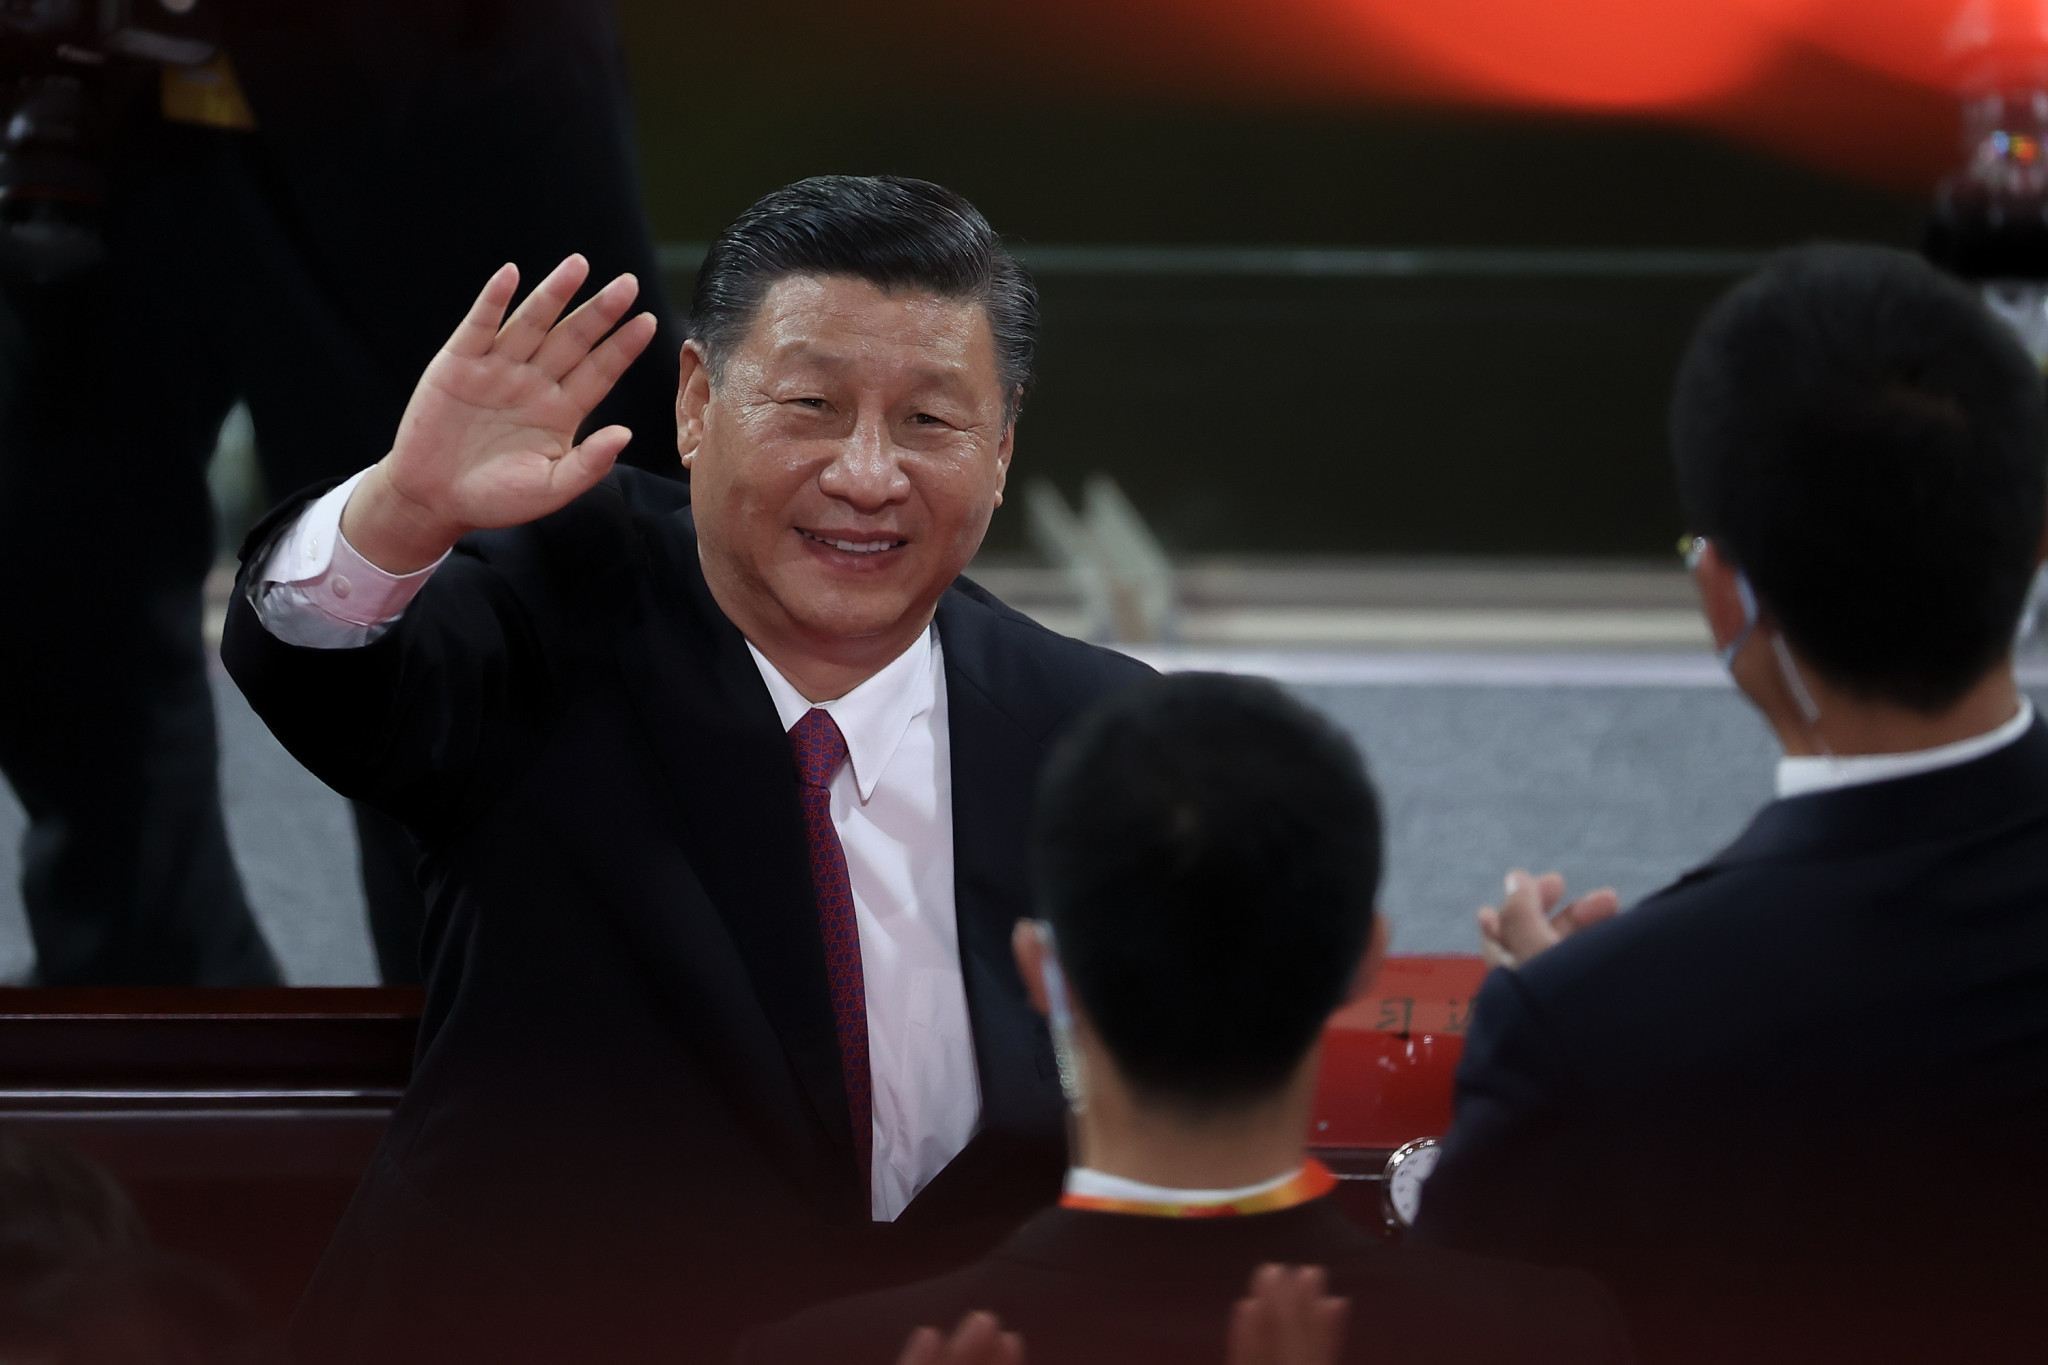 Chinese President Xi Jinping visited various Beijing 2022 venues with fewer than 30 days to go until the Winter Olympics are due to open ©Getty Images